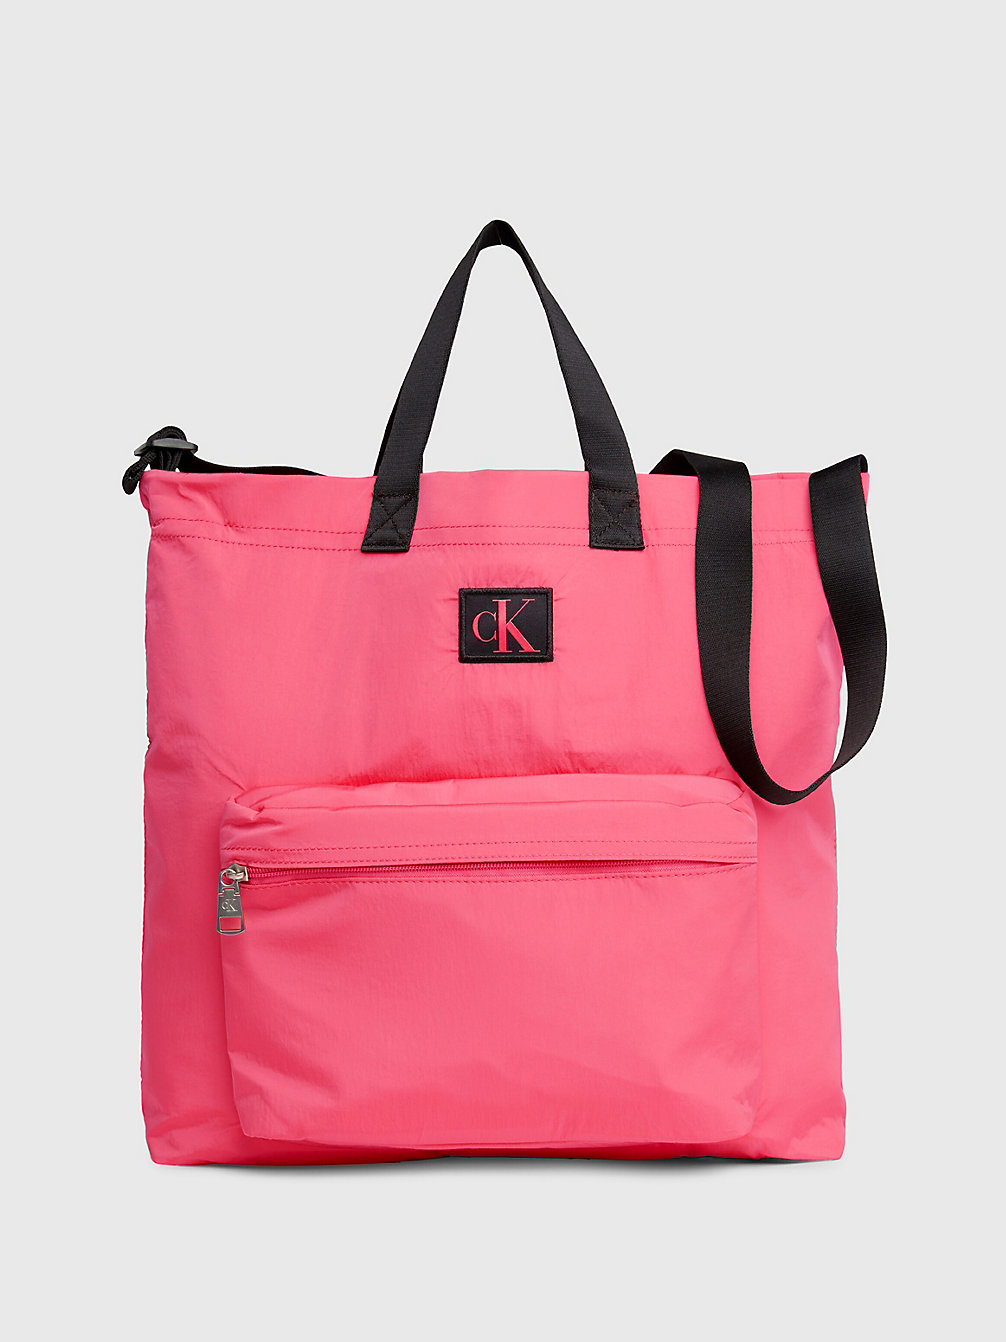 PINK FLASH Recycled Nylon Tote Bag undefined women Calvin Klein